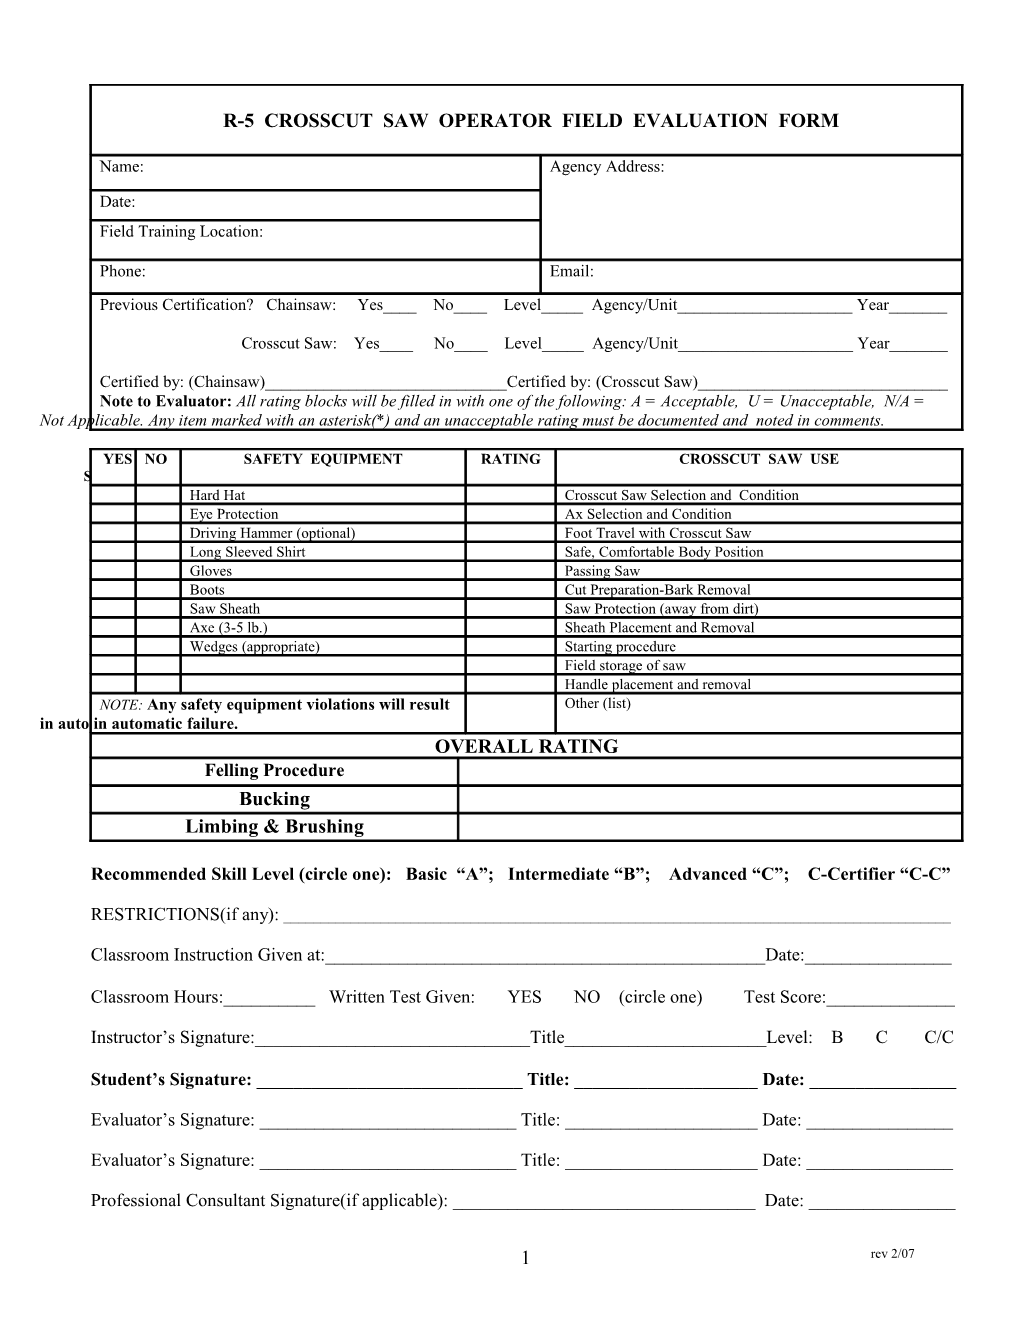 R-5 Chainsaw Operator Field Evaluation Form